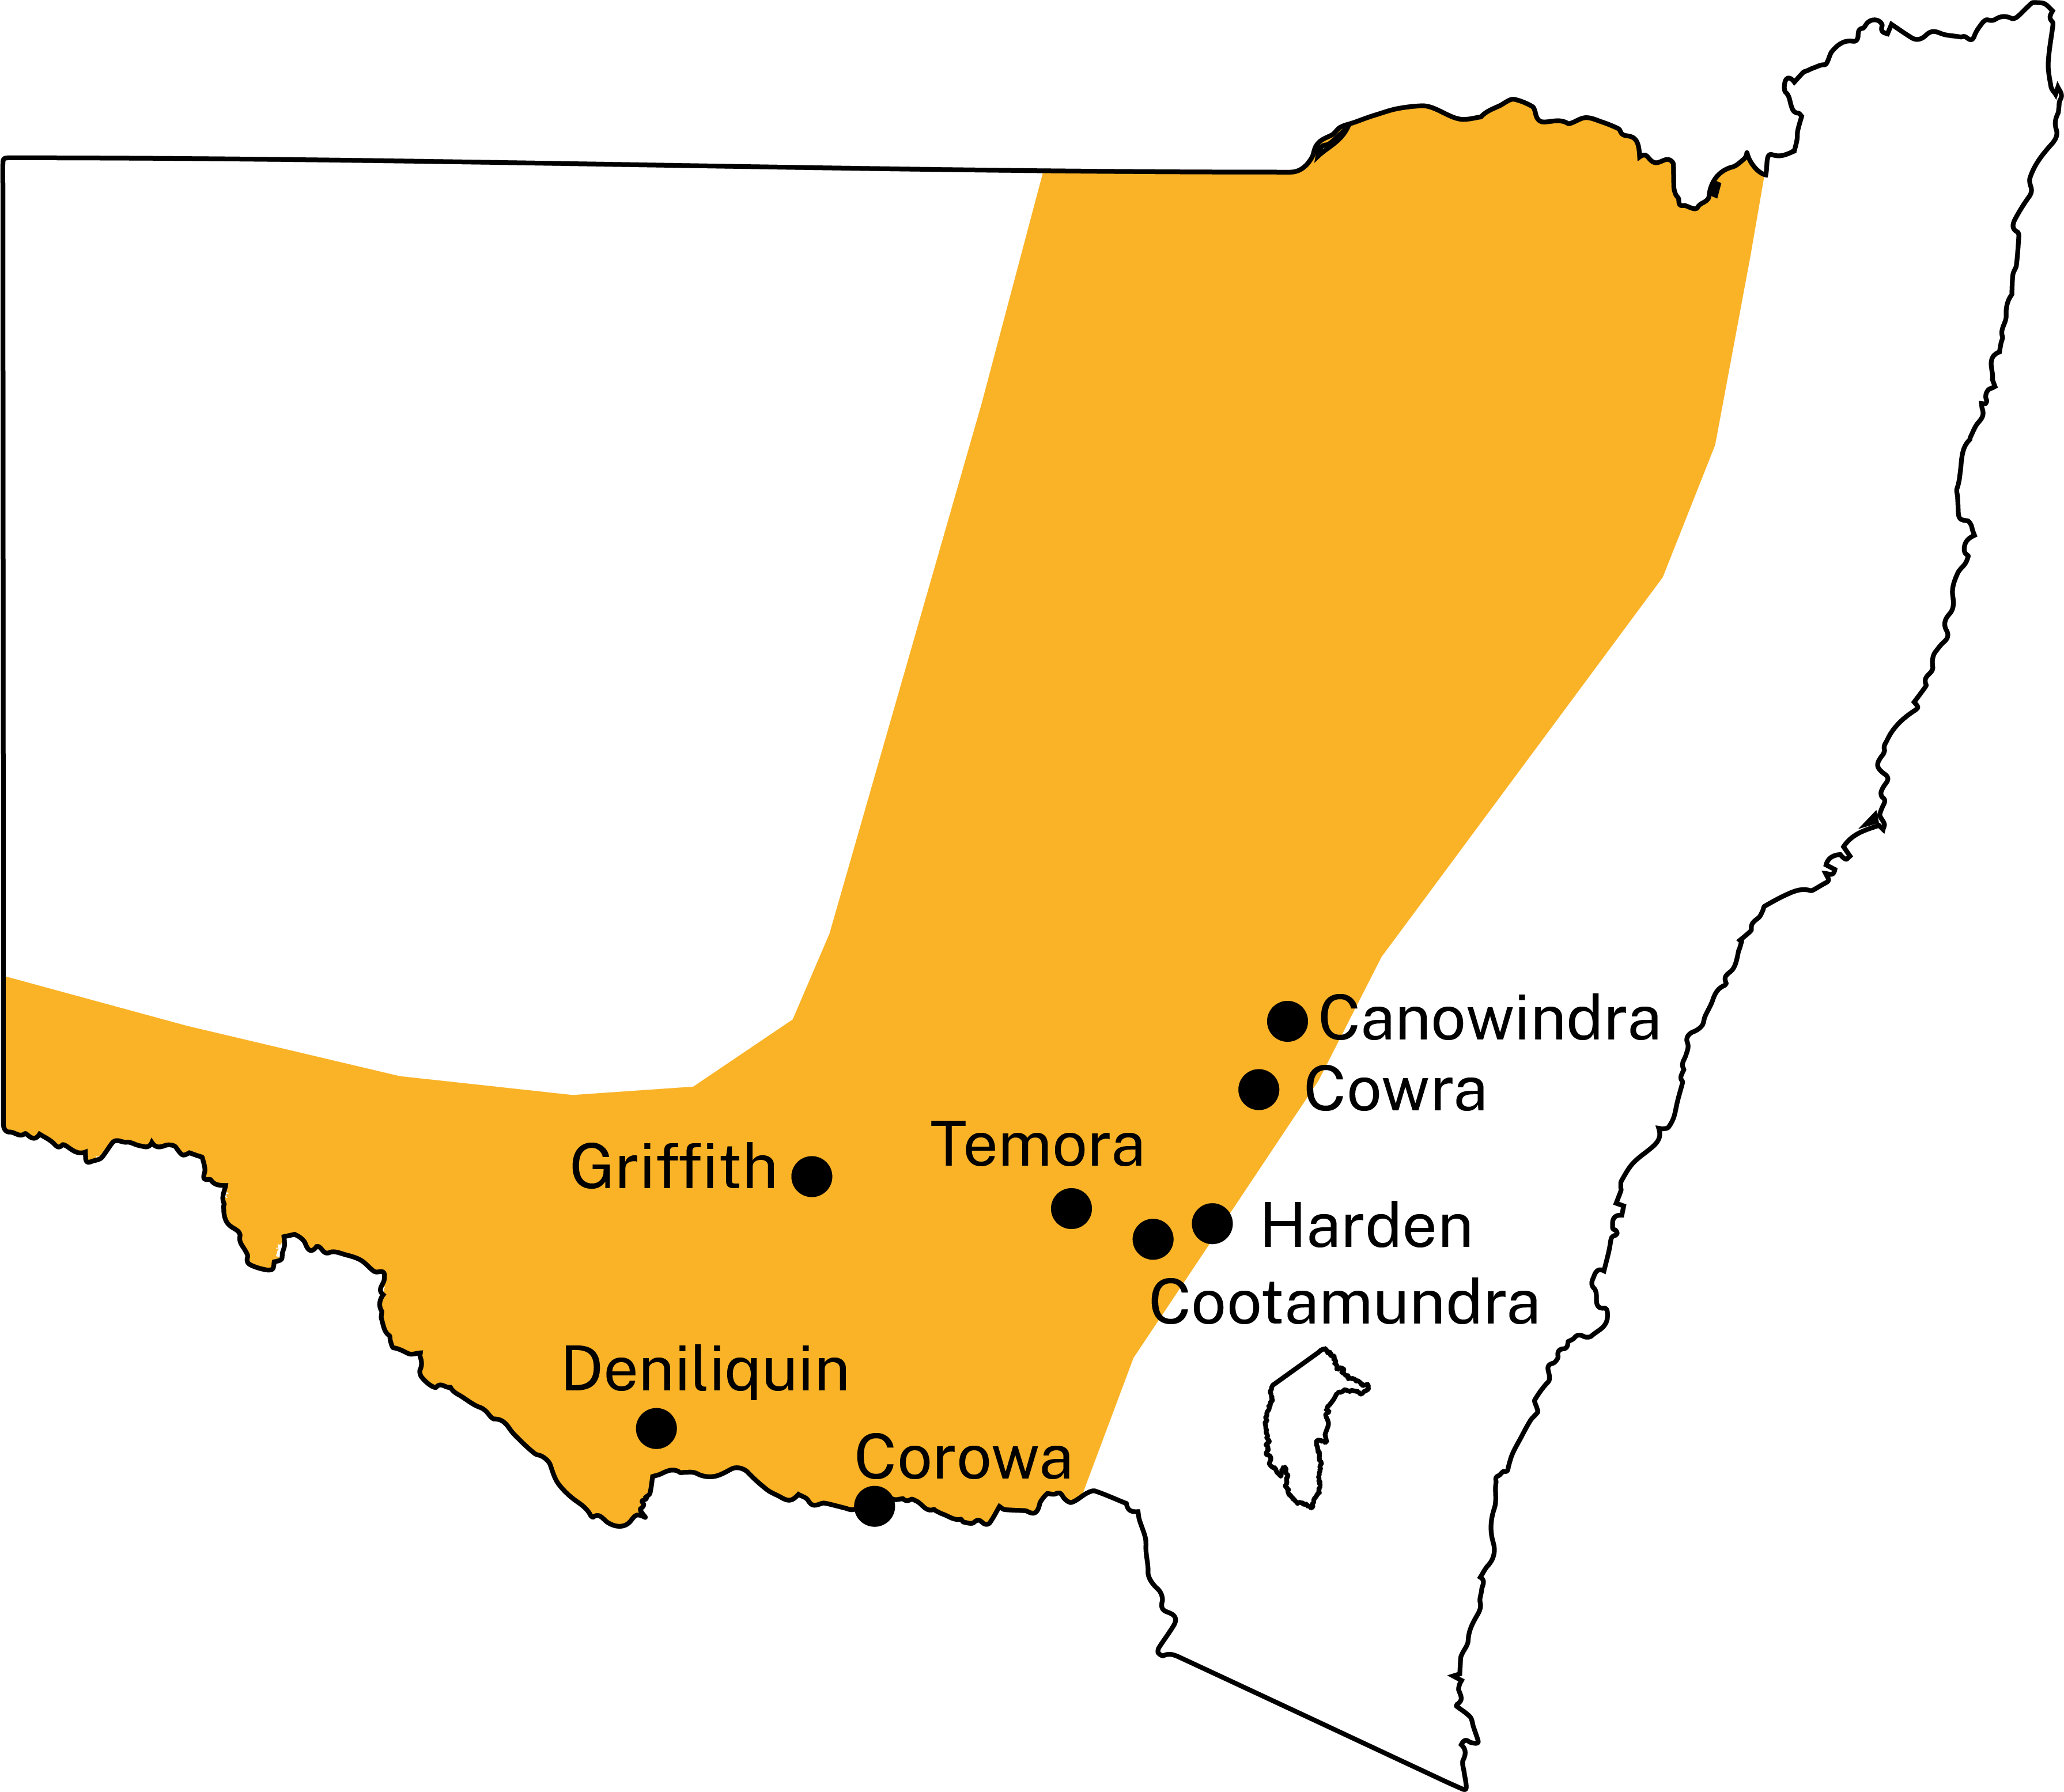 The cropping region of NSW extends along the south-west border of the state and then northwards to Queensland, west of the Great Dividing Range.